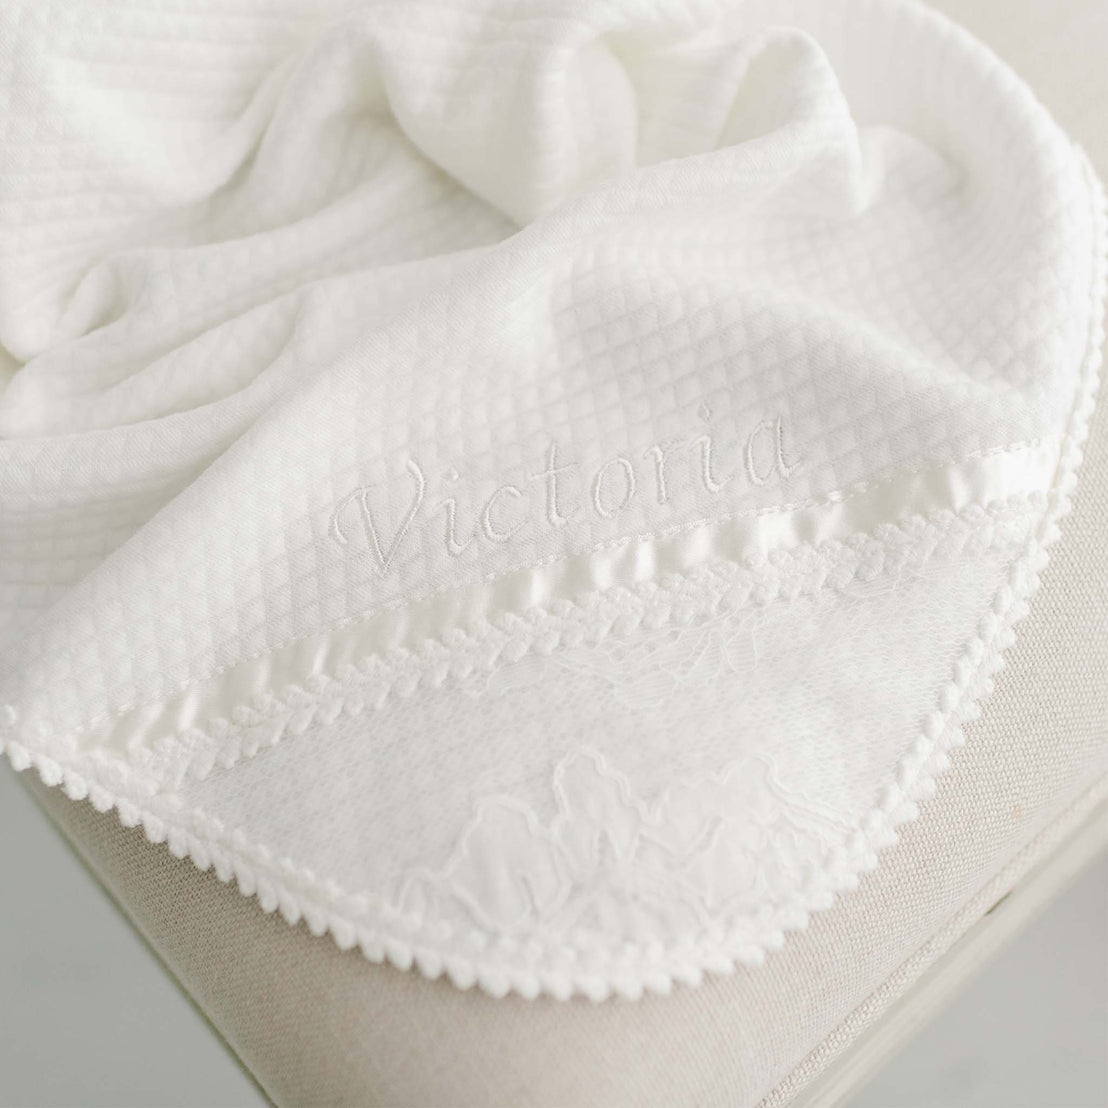 Closeup photograph of the corner of the quilted cotton Victoria baptism blanket. Personalized with the name Victoria embroidered in the corner.